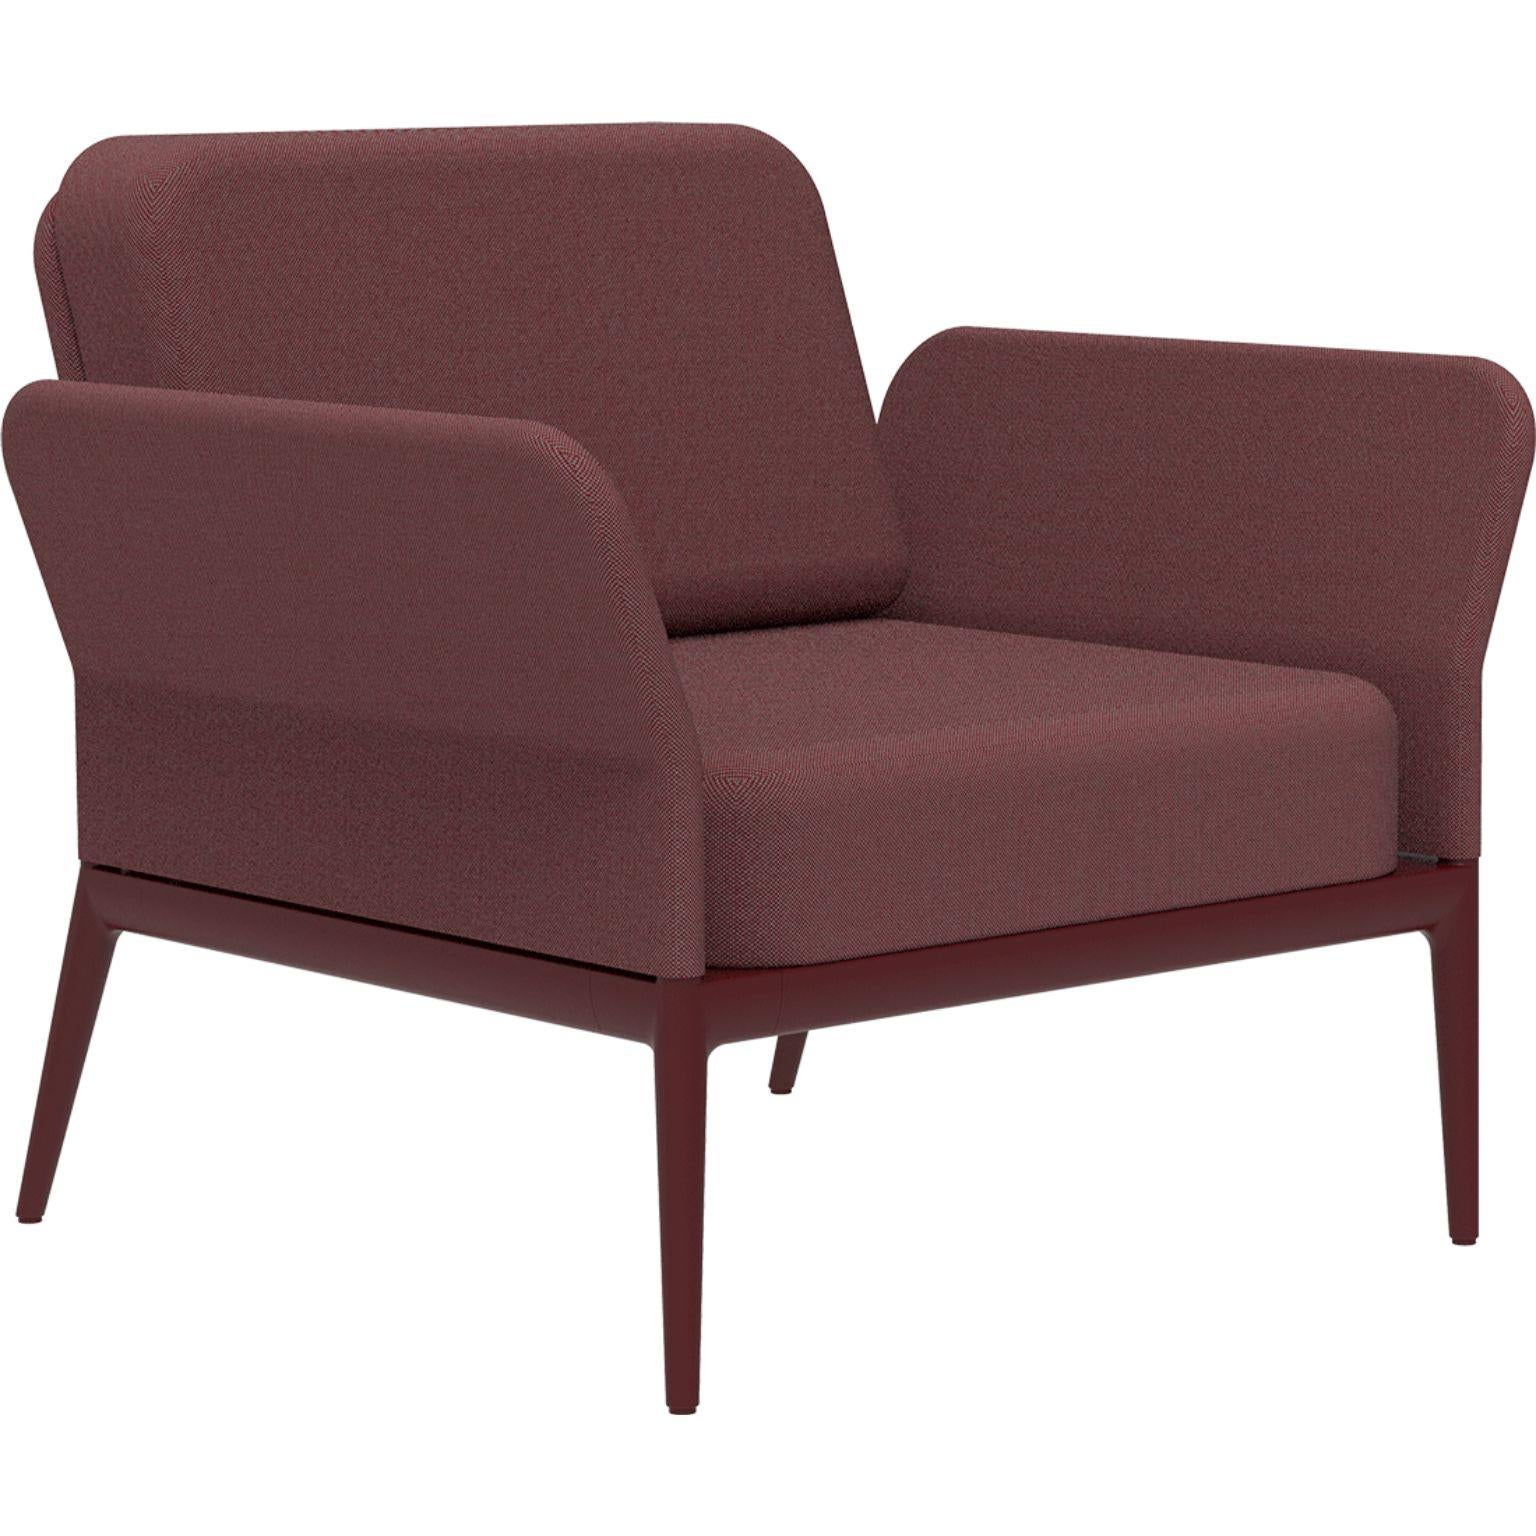 Cover Burgundy Longue Chair by MOWEE
Dimensions: D83 x W91 x H81 cm (seat height 42 cm).
Material: Aluminum and upholstery.
Weight: 20 kg.
Also available in different colors and finishes.

An unmistakable collection for its beauty and